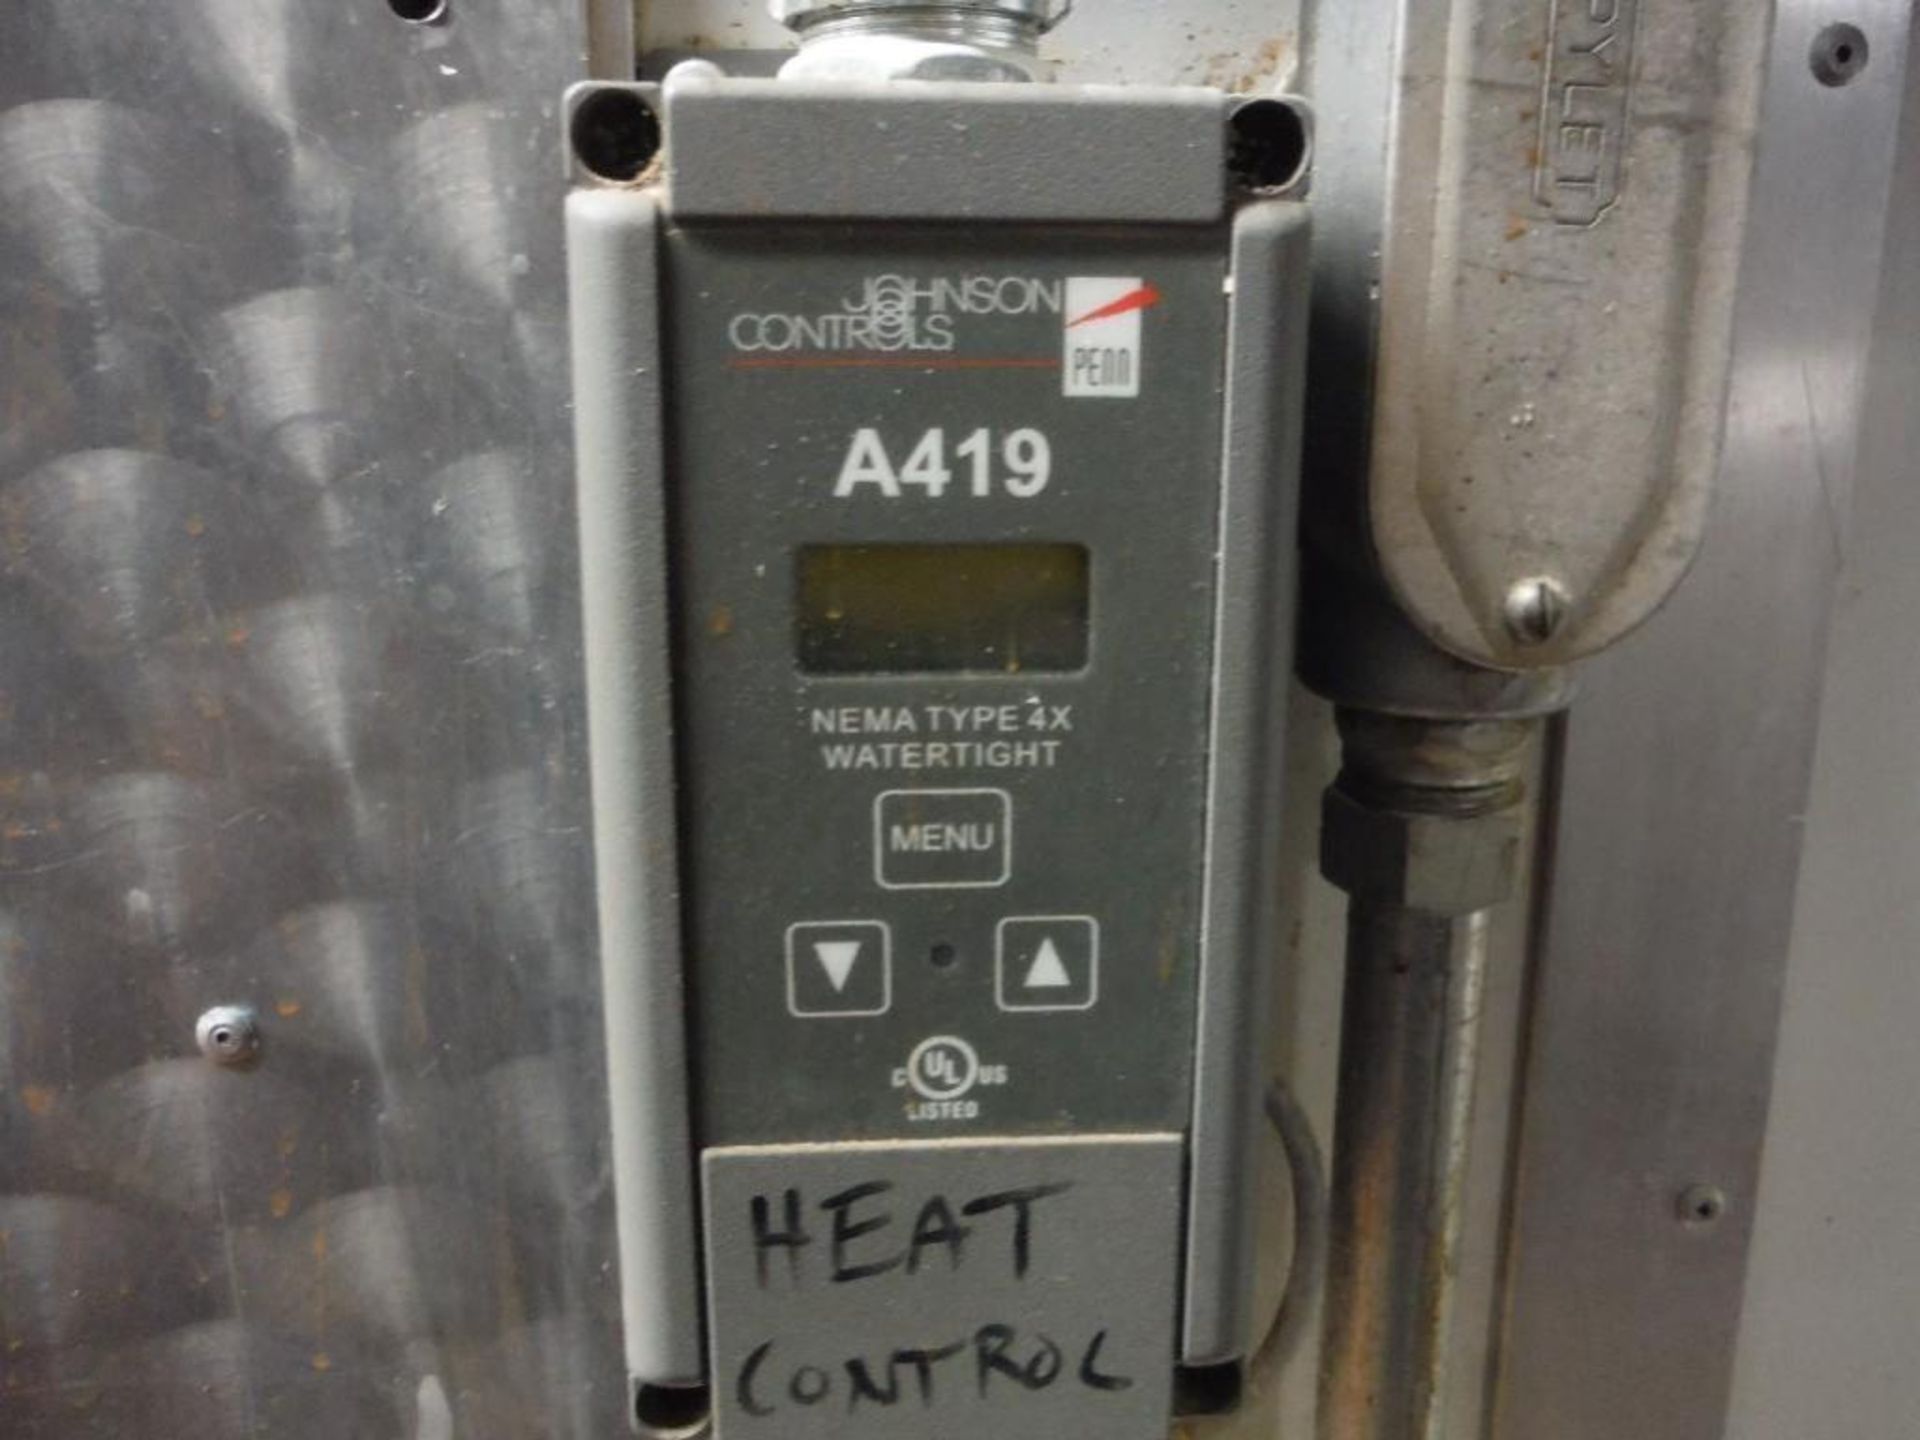 RFH cooling tunnel, single zone, cold plate 50 ft. long x 42 in. wide, freon - Rigging Fee: $700 - Image 14 of 14